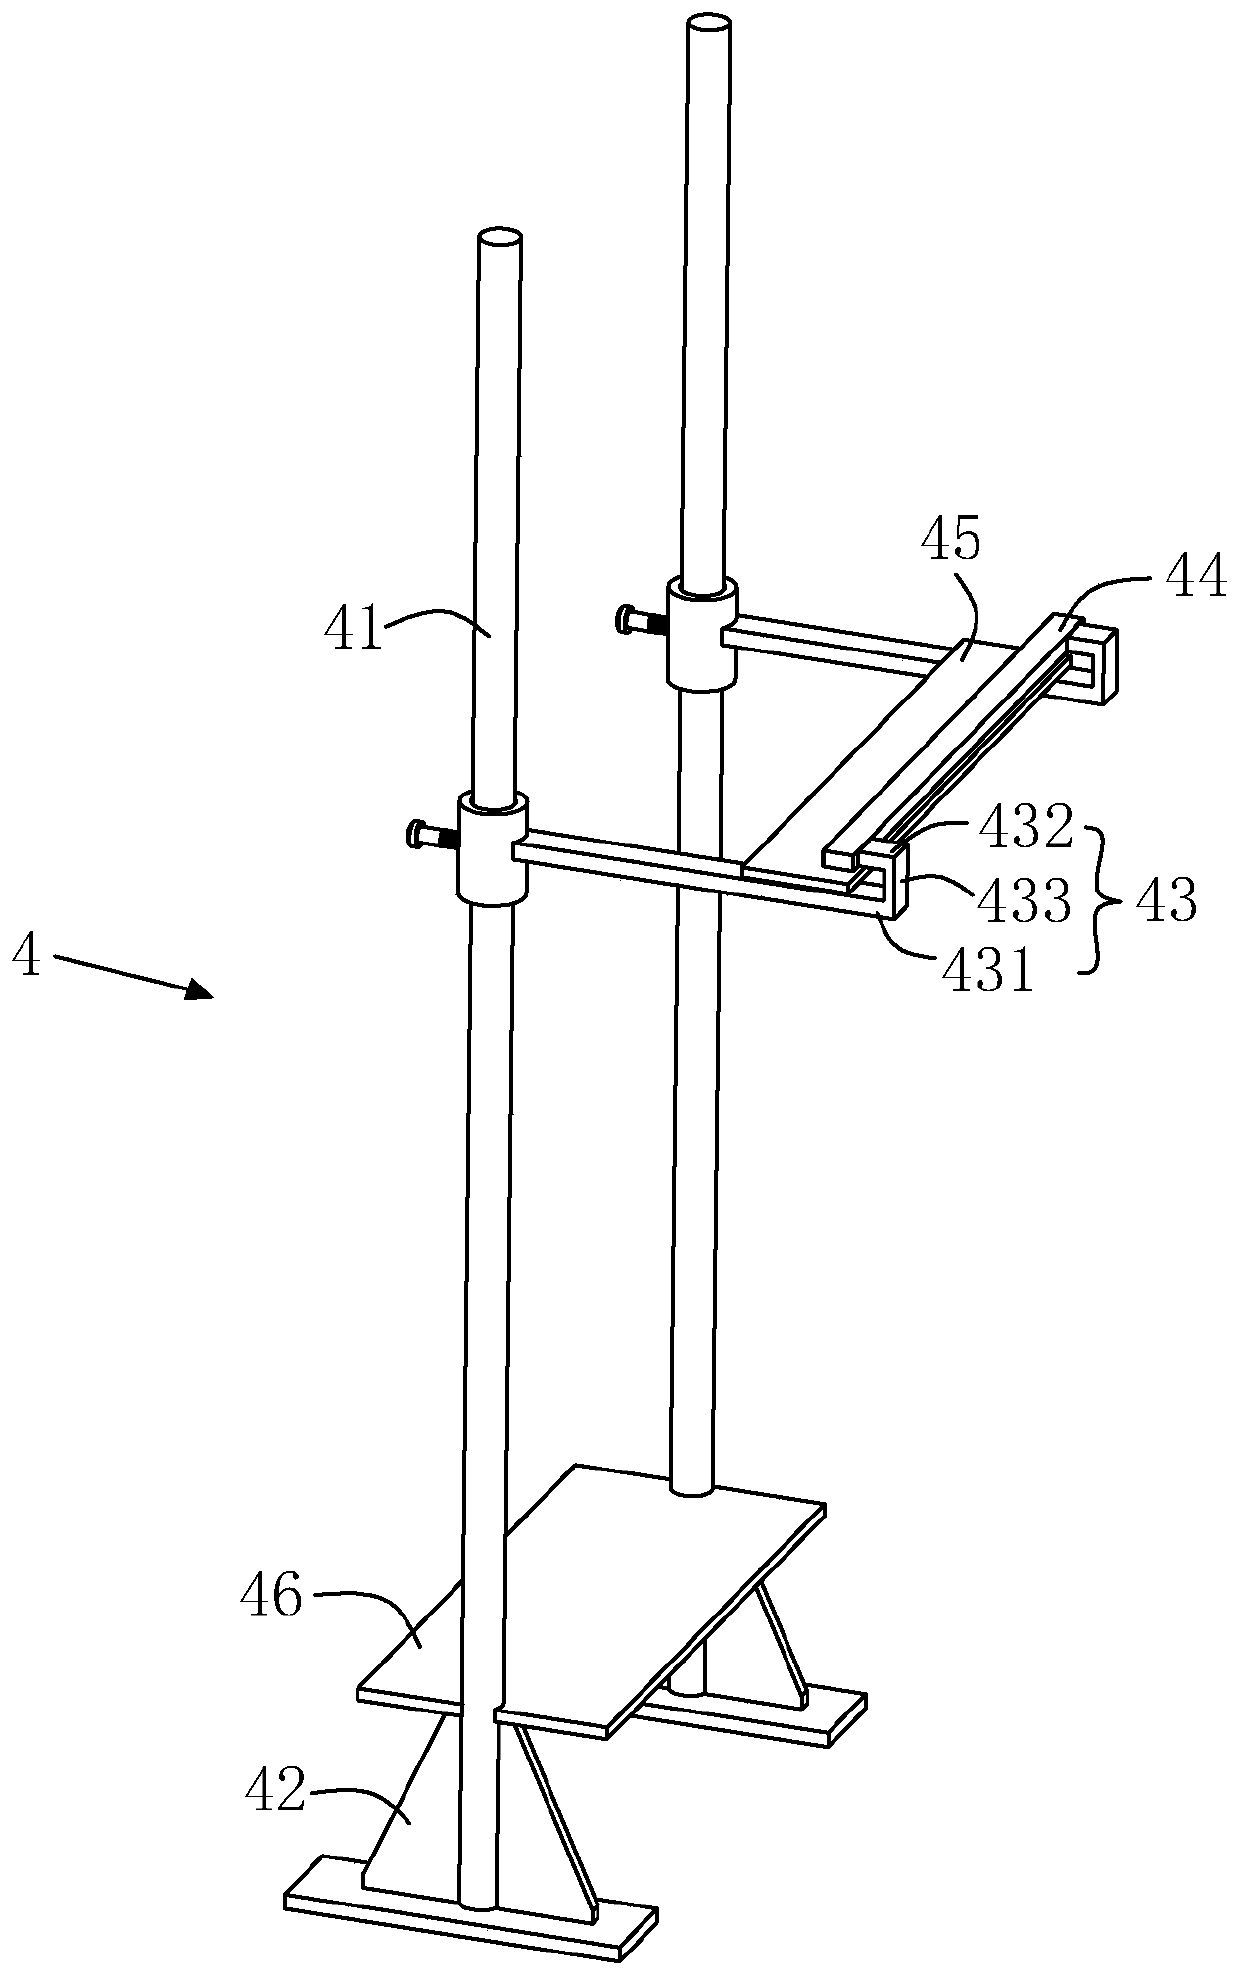 Prefabricated bay window and its construction method